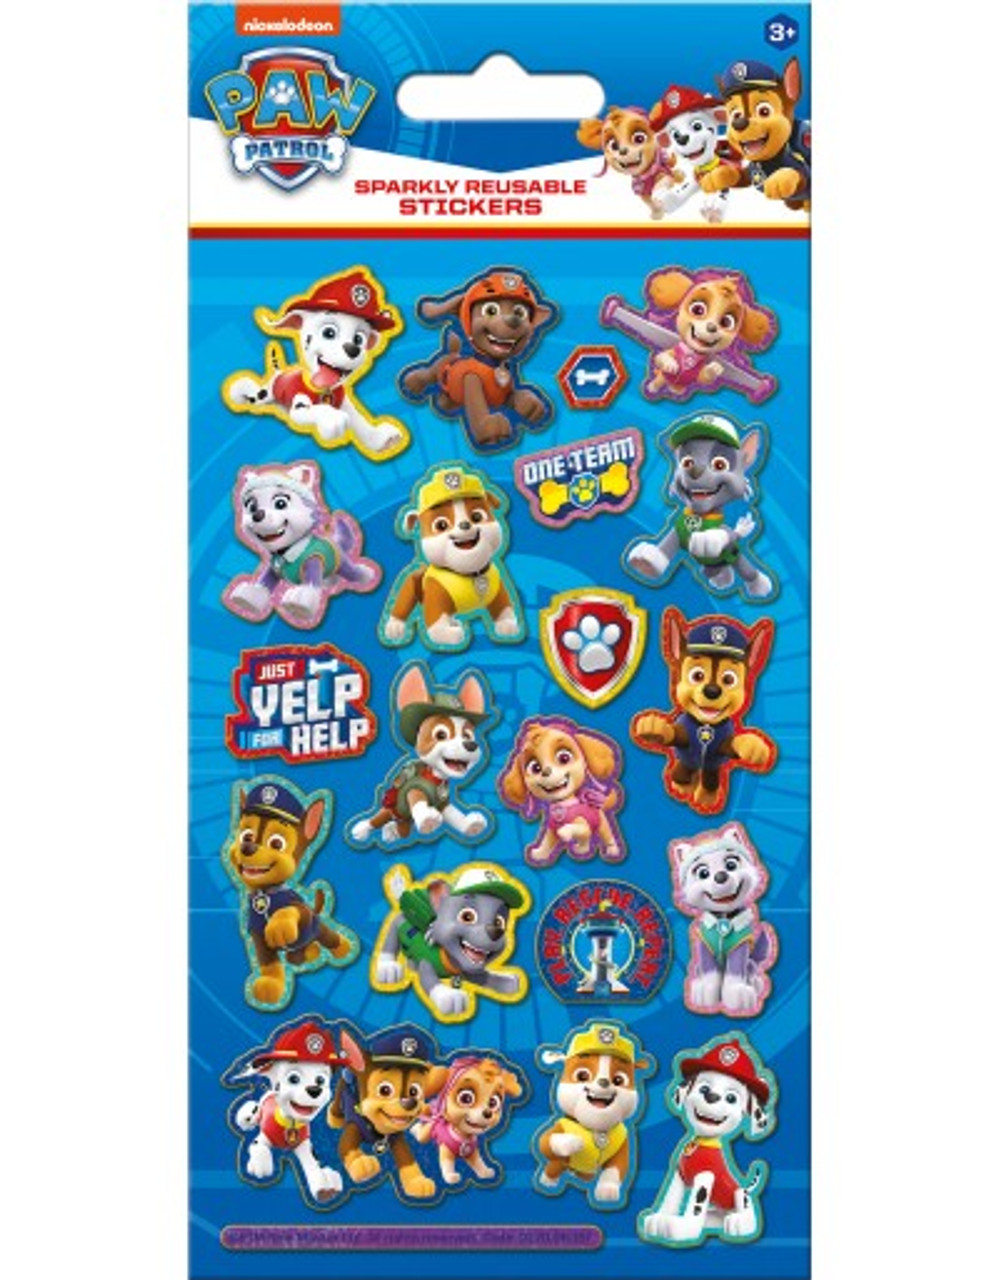 PAW PATROL FOILED STICKERS